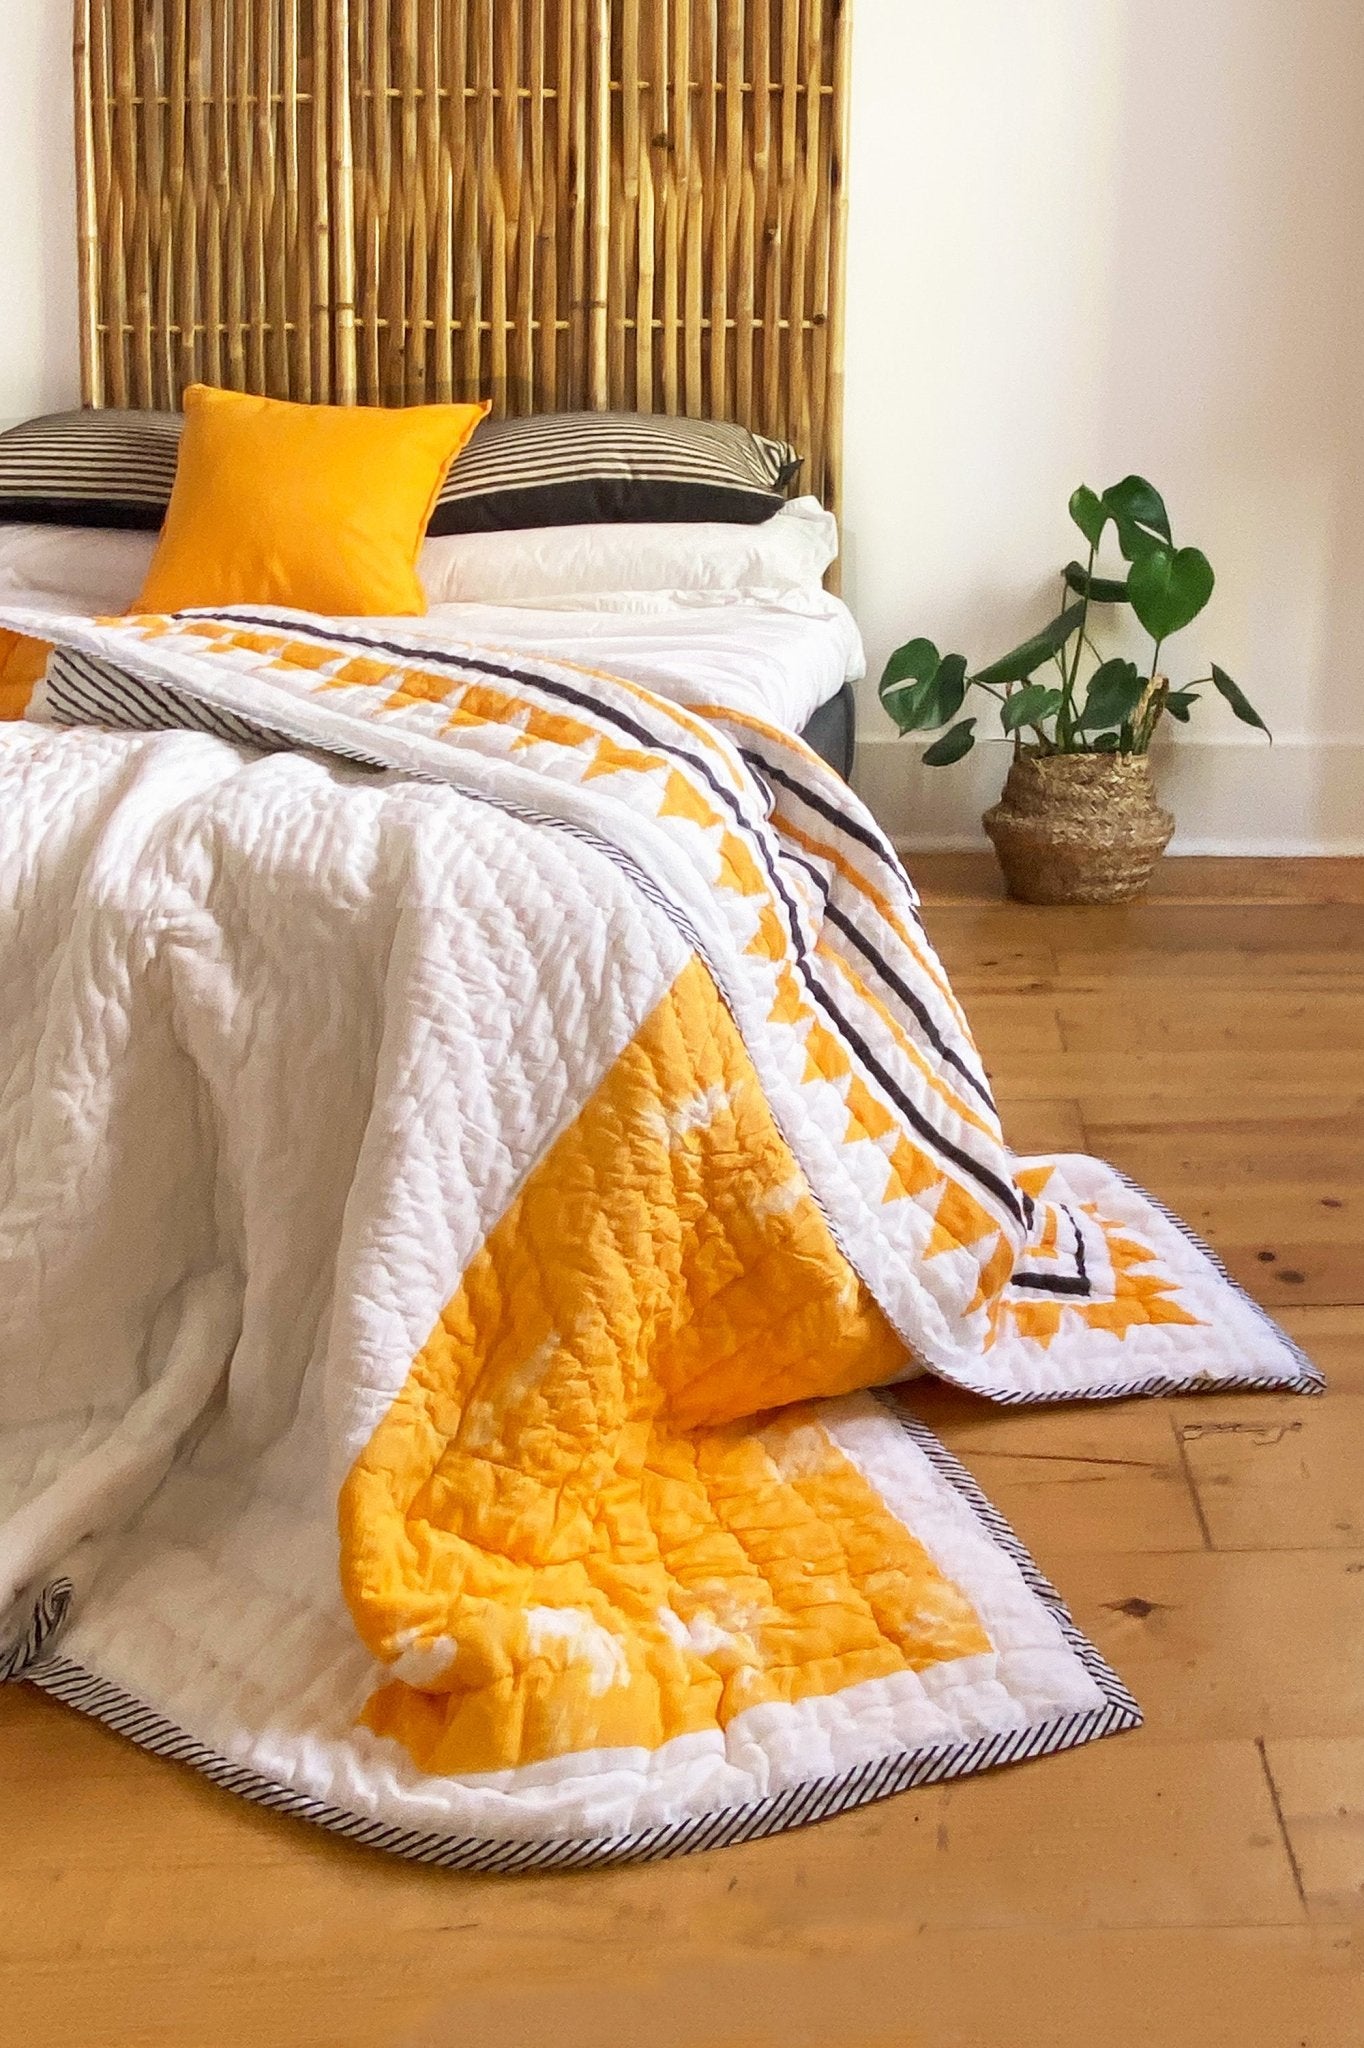 Block Printed Black, White and Yellow Geometric Quilted Bedspread - Biggs & Hill - Bedspread - Bedspread - black - blanket